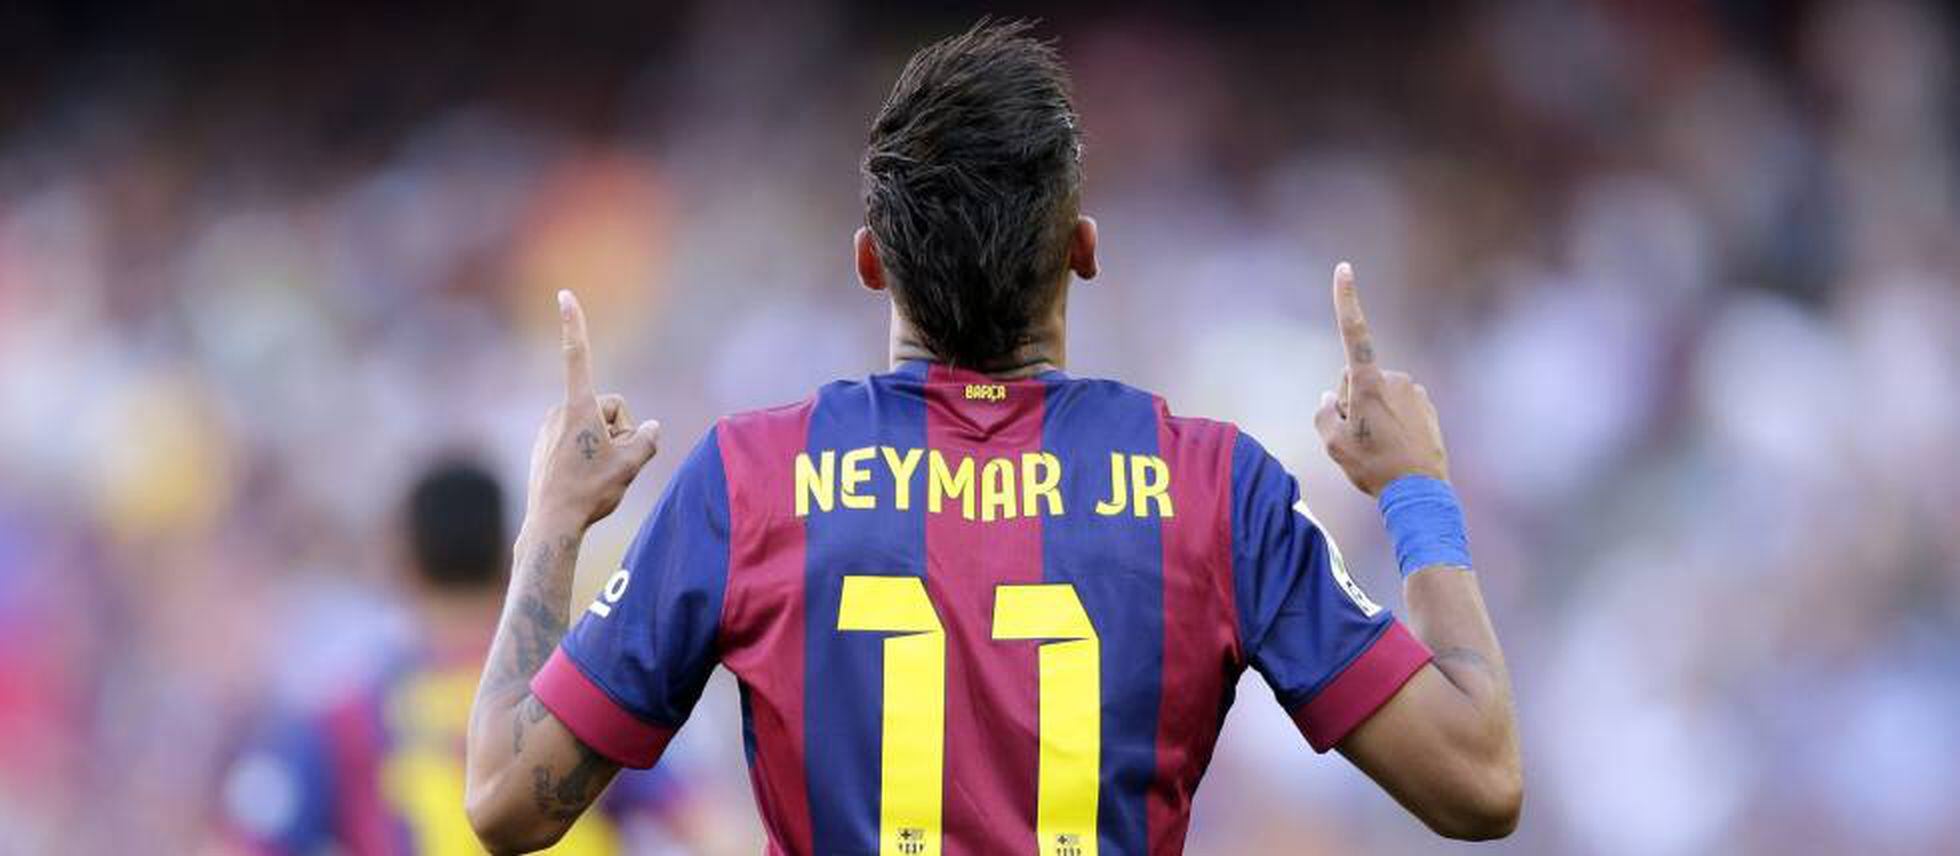 Neymar Quits Barcelona Fc Neymar S Exit From Barcelona Proves As Controversial As His Arrival Sports El Pais In English